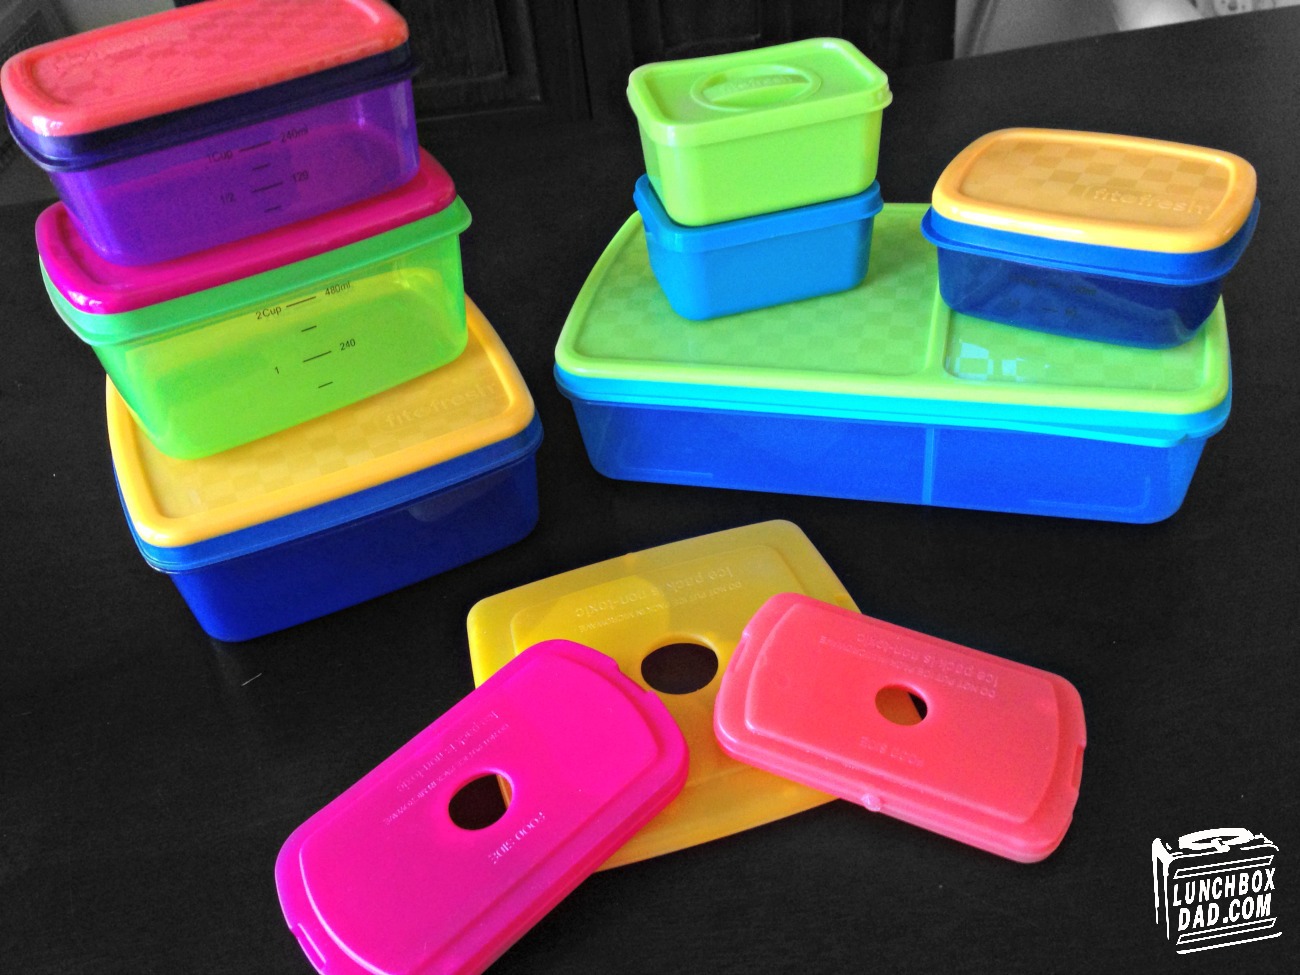 Lunchbox Dad: Review: Fit & Fresh Lunchboxes: Are They Fun & Functional too?